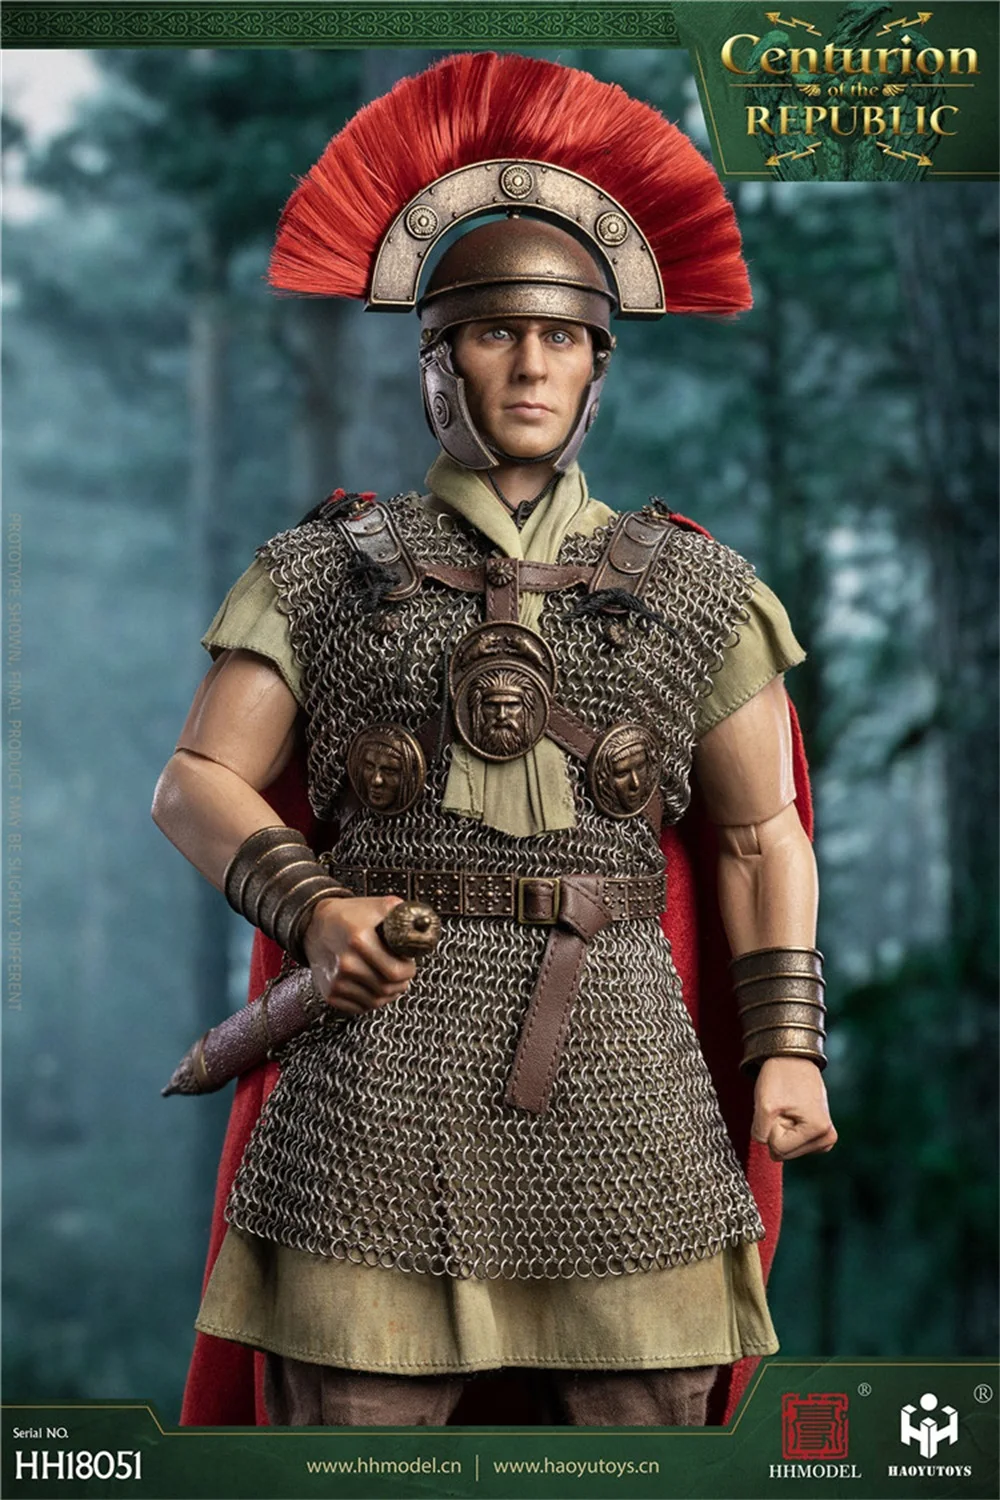 

1/6 HHMODEL & HAOYUTOYS HH18051 Imperial Centurion of the Republic Thirteenth Legion War Metal Chain Mail Chest Vest For Collect